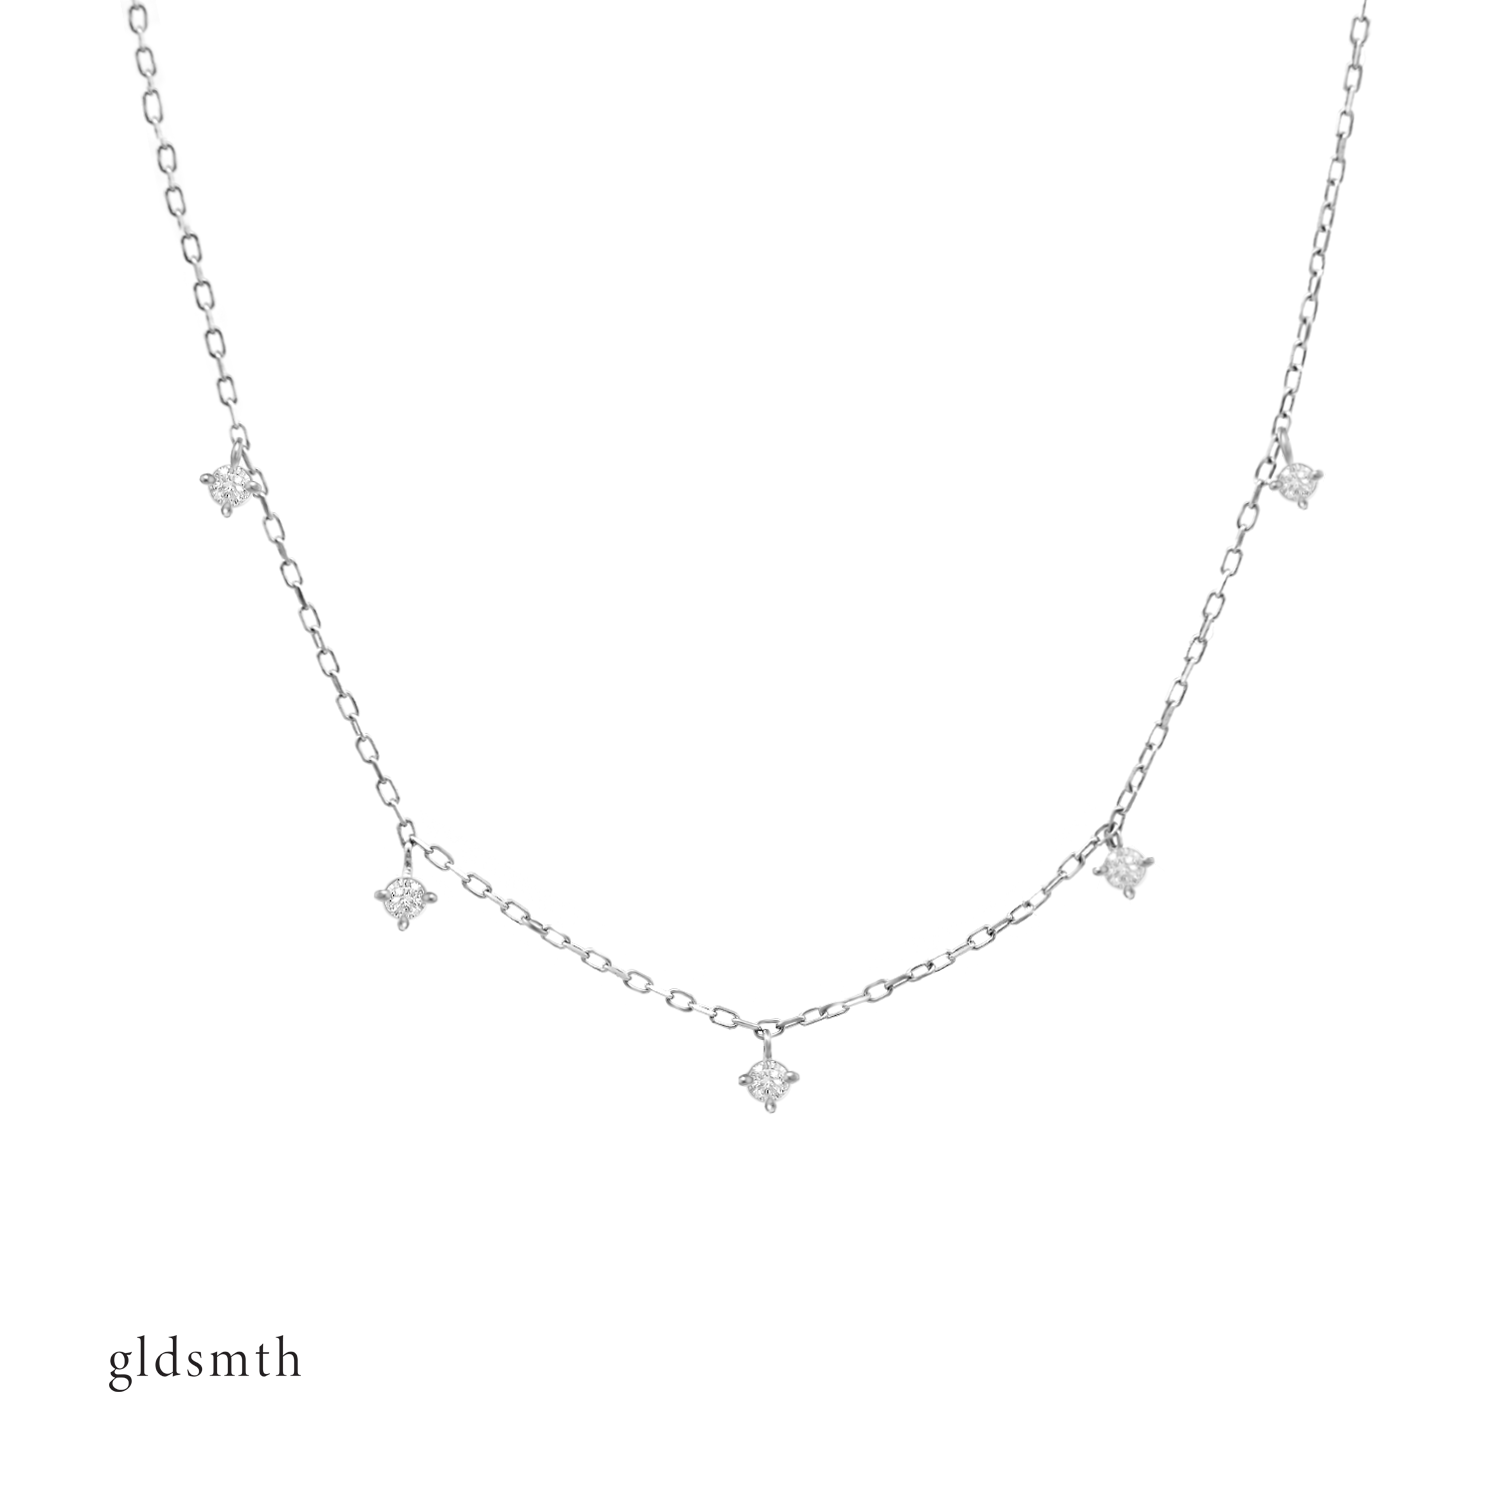 Graceful and delicate hand crafted 10k solid white gold necklace with conflict-free diamonds.